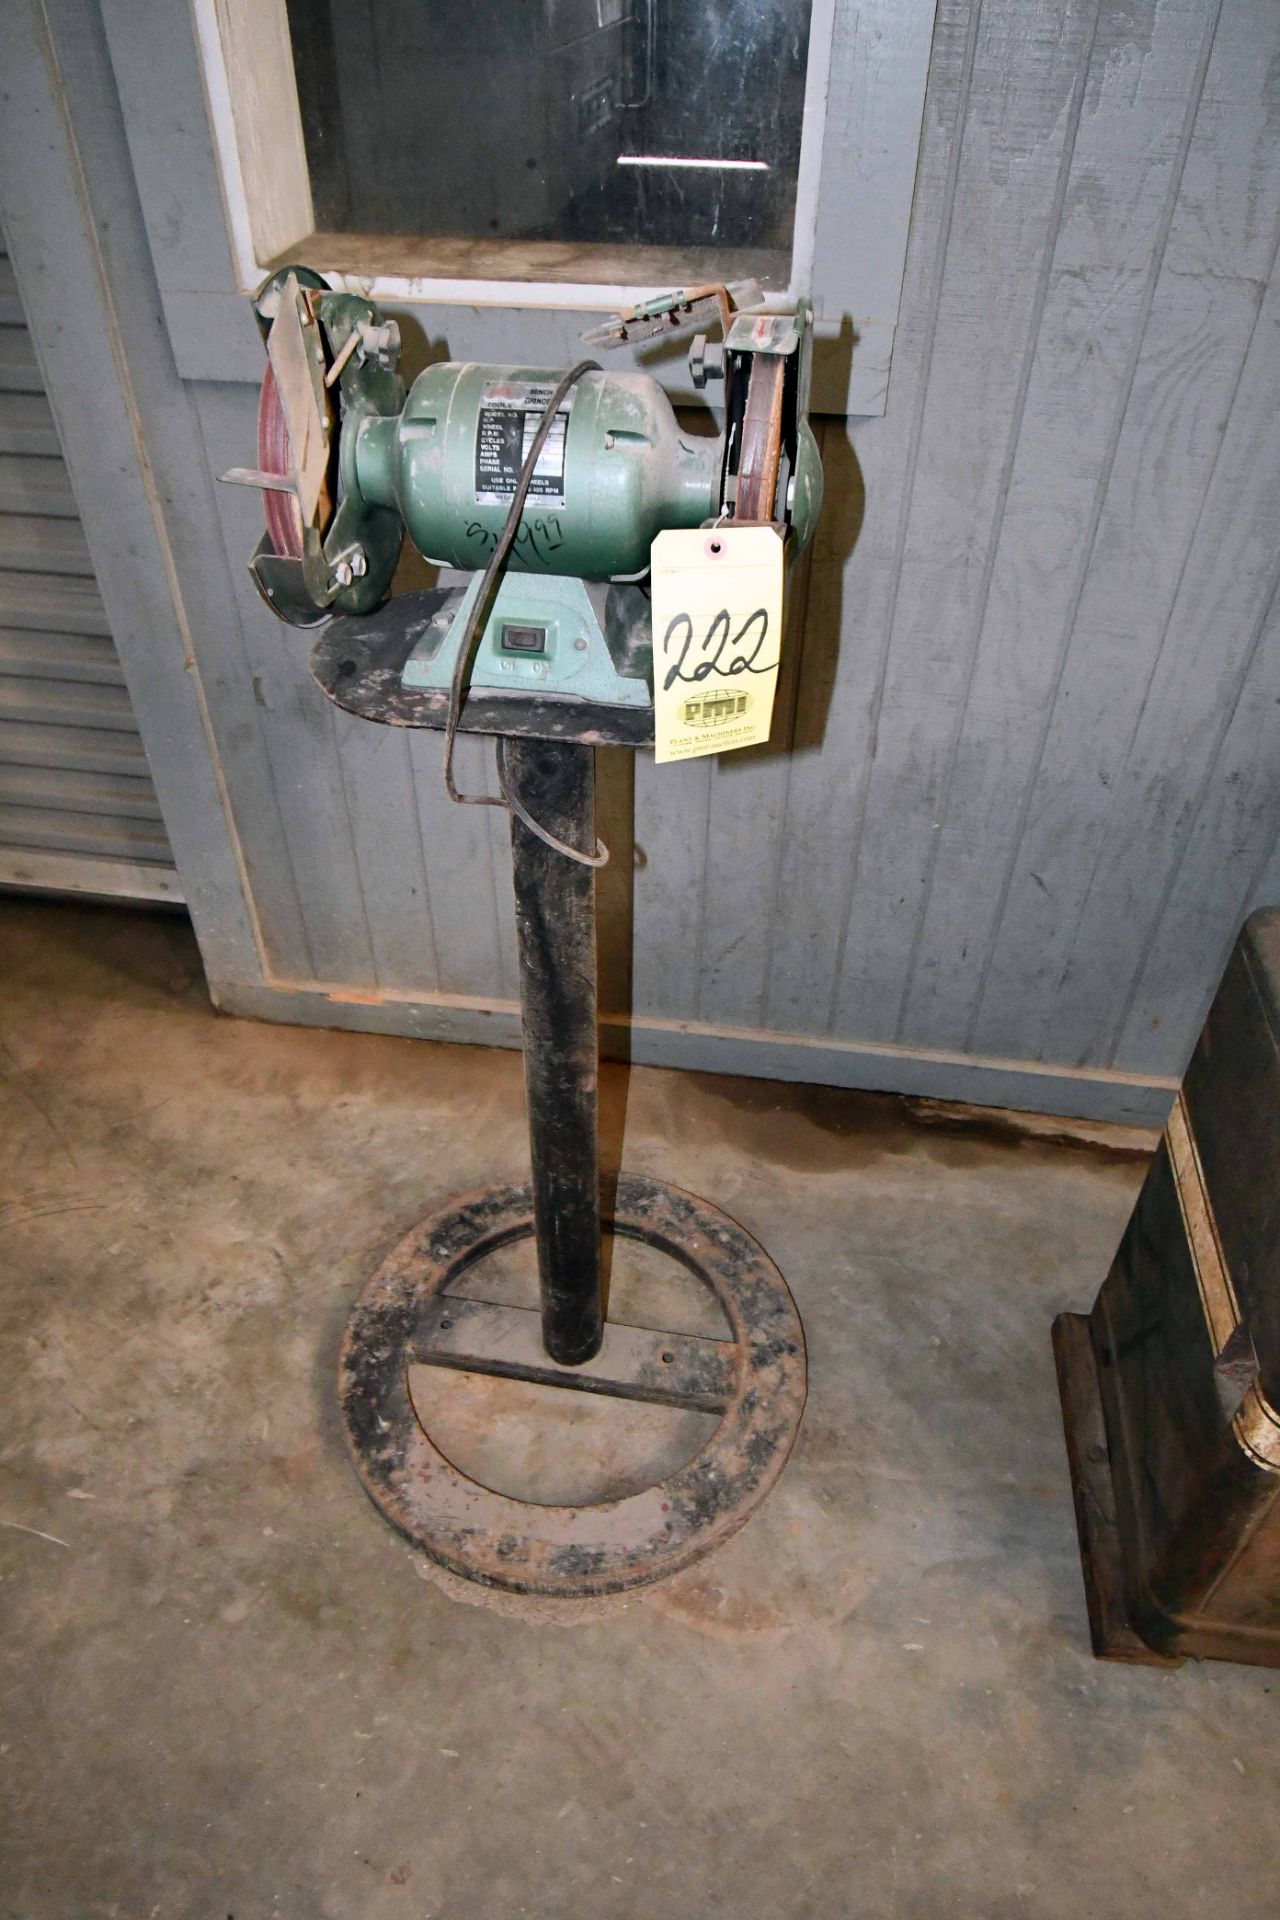 DOUBLE END PEDESTAL GRINDER, H.B. TOOLS (Location: MDS Boring & Drilling, 11900 Hirsch Road,